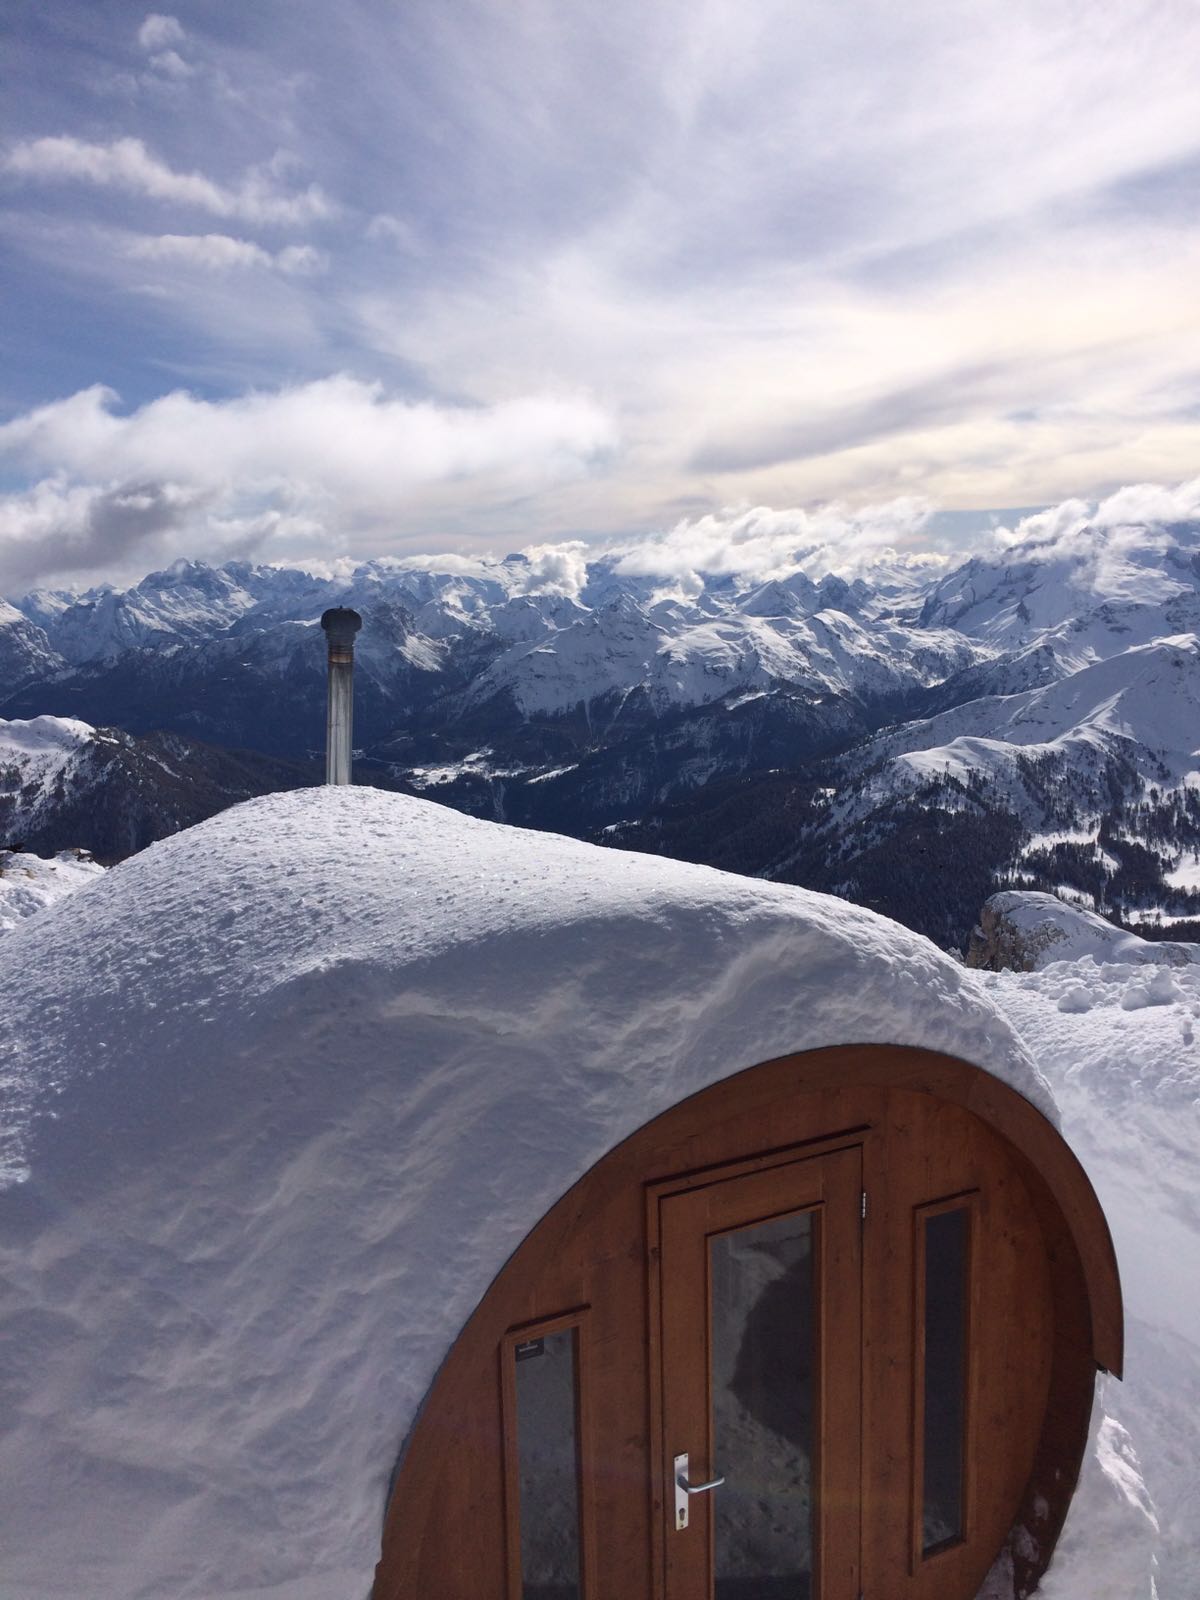 Rifugio Lagazuoi. A special place in paradise. View of the sauna with a view. Photo: Cortina Marketing. What’s new in Cortina for the 2019-2020 Winter Season.